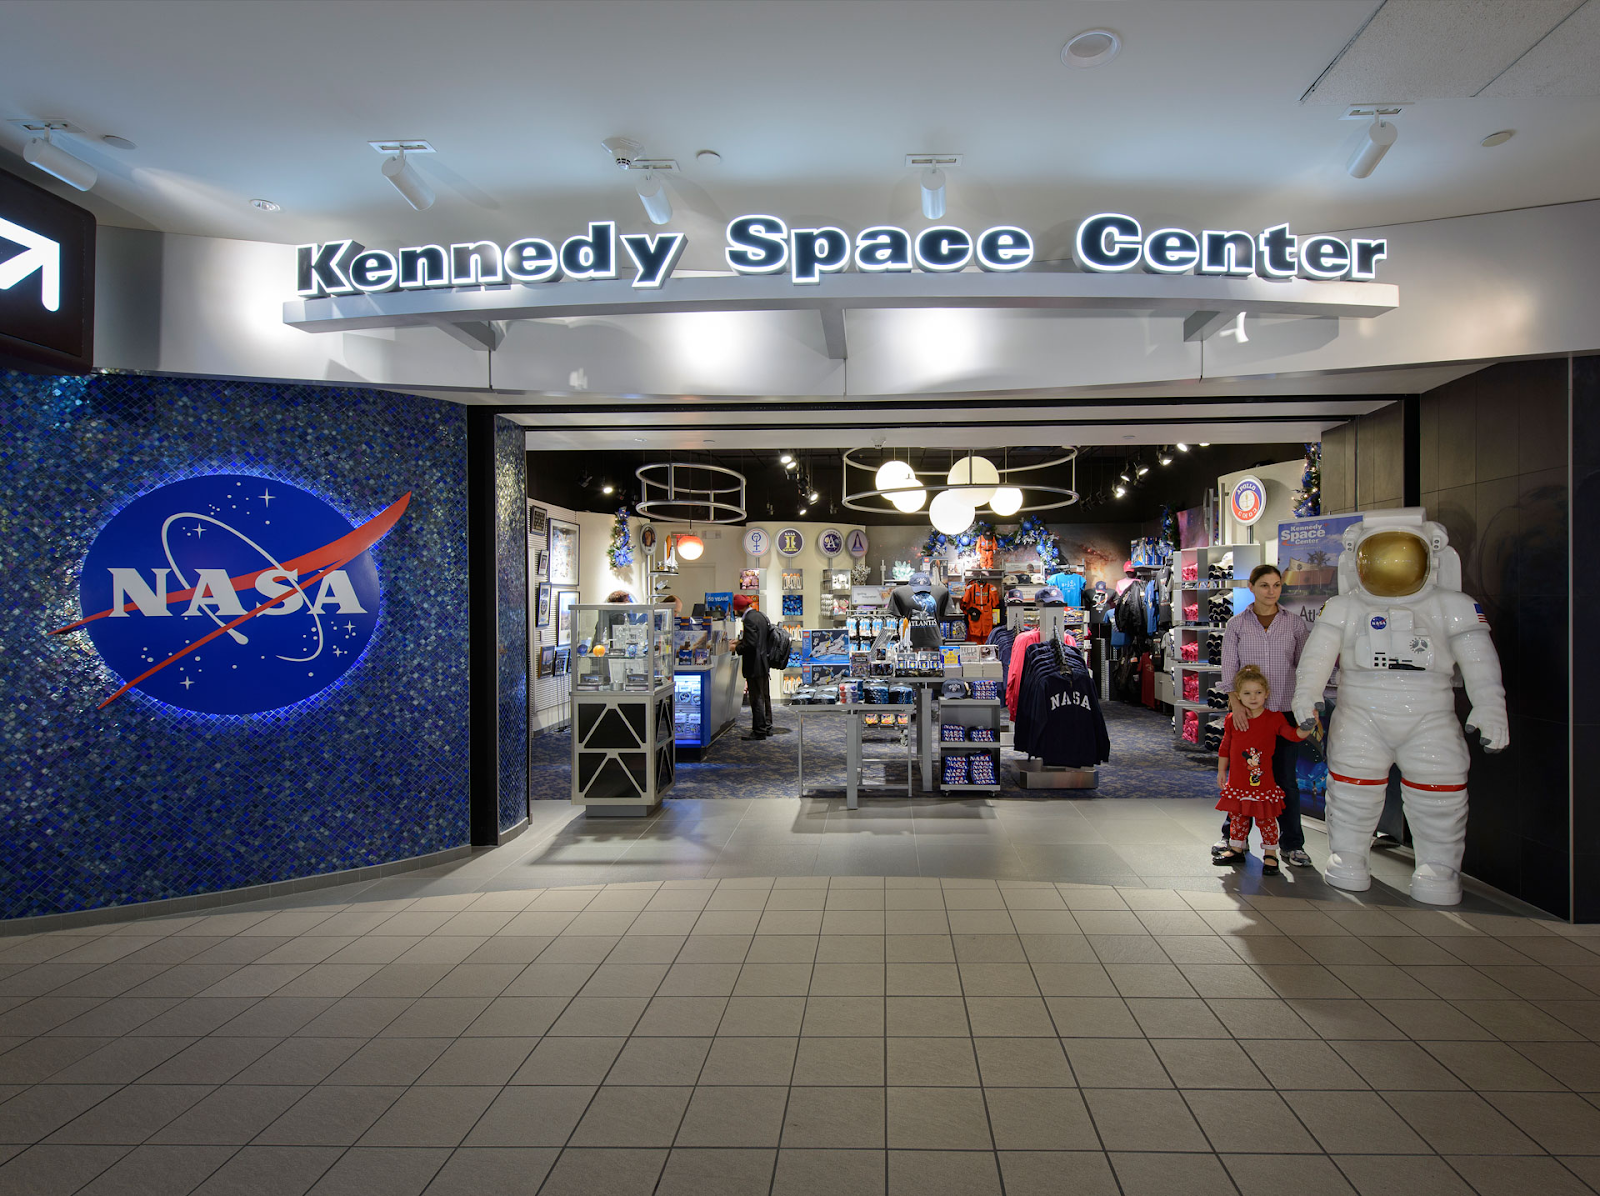 Go to the Kennedy Space Center